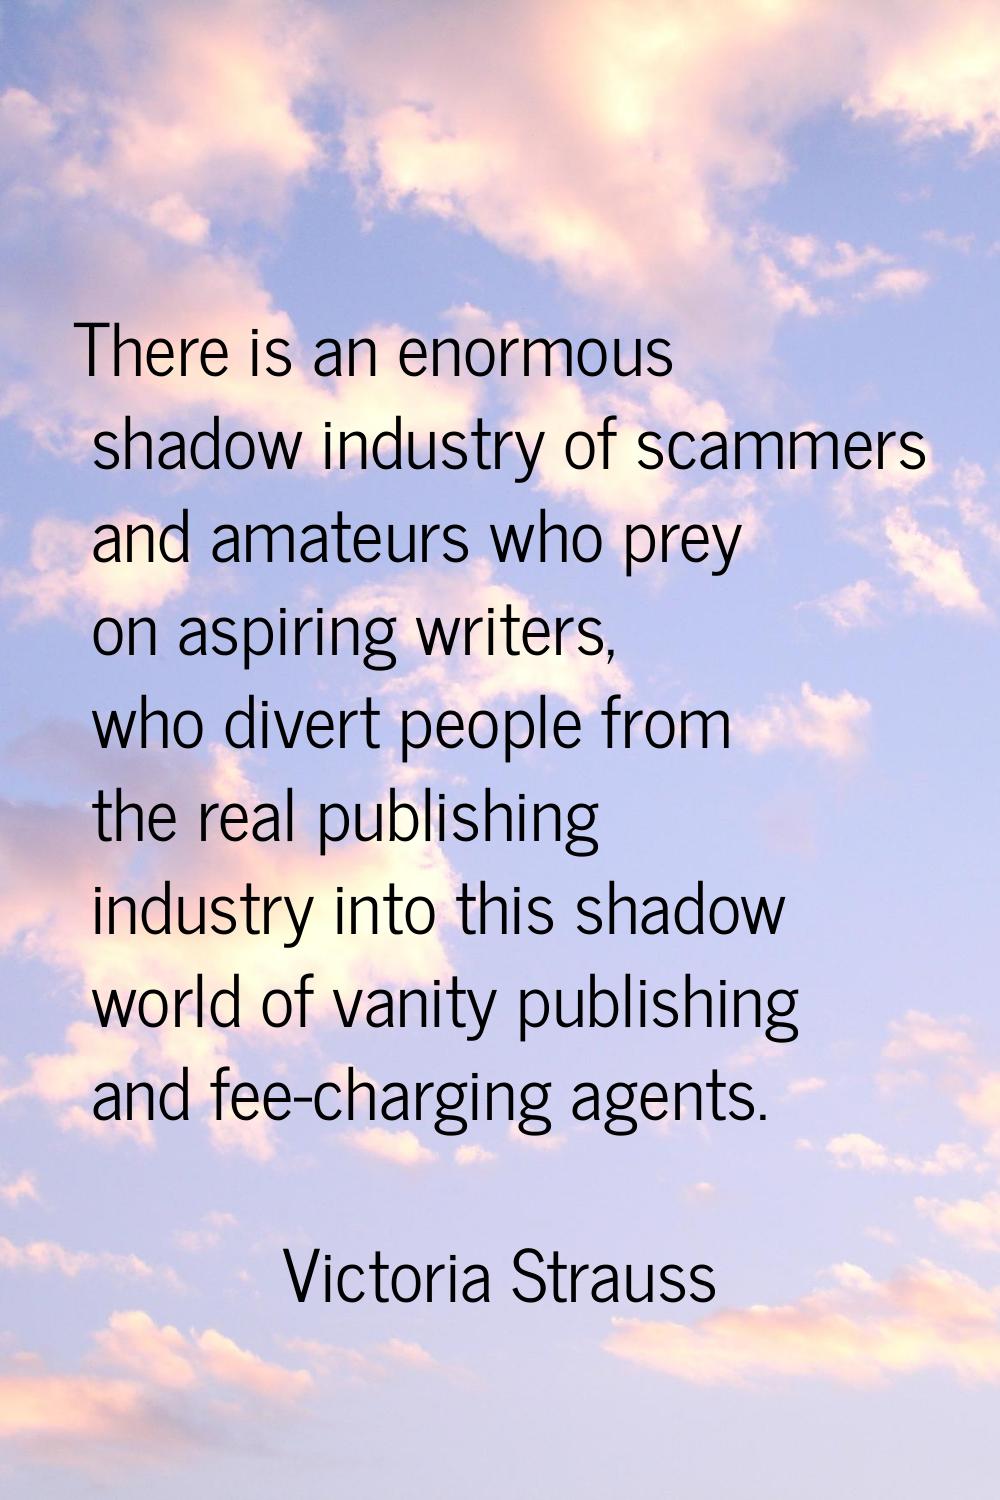 There is an enormous shadow industry of scammers and amateurs who prey on aspiring writers, who div